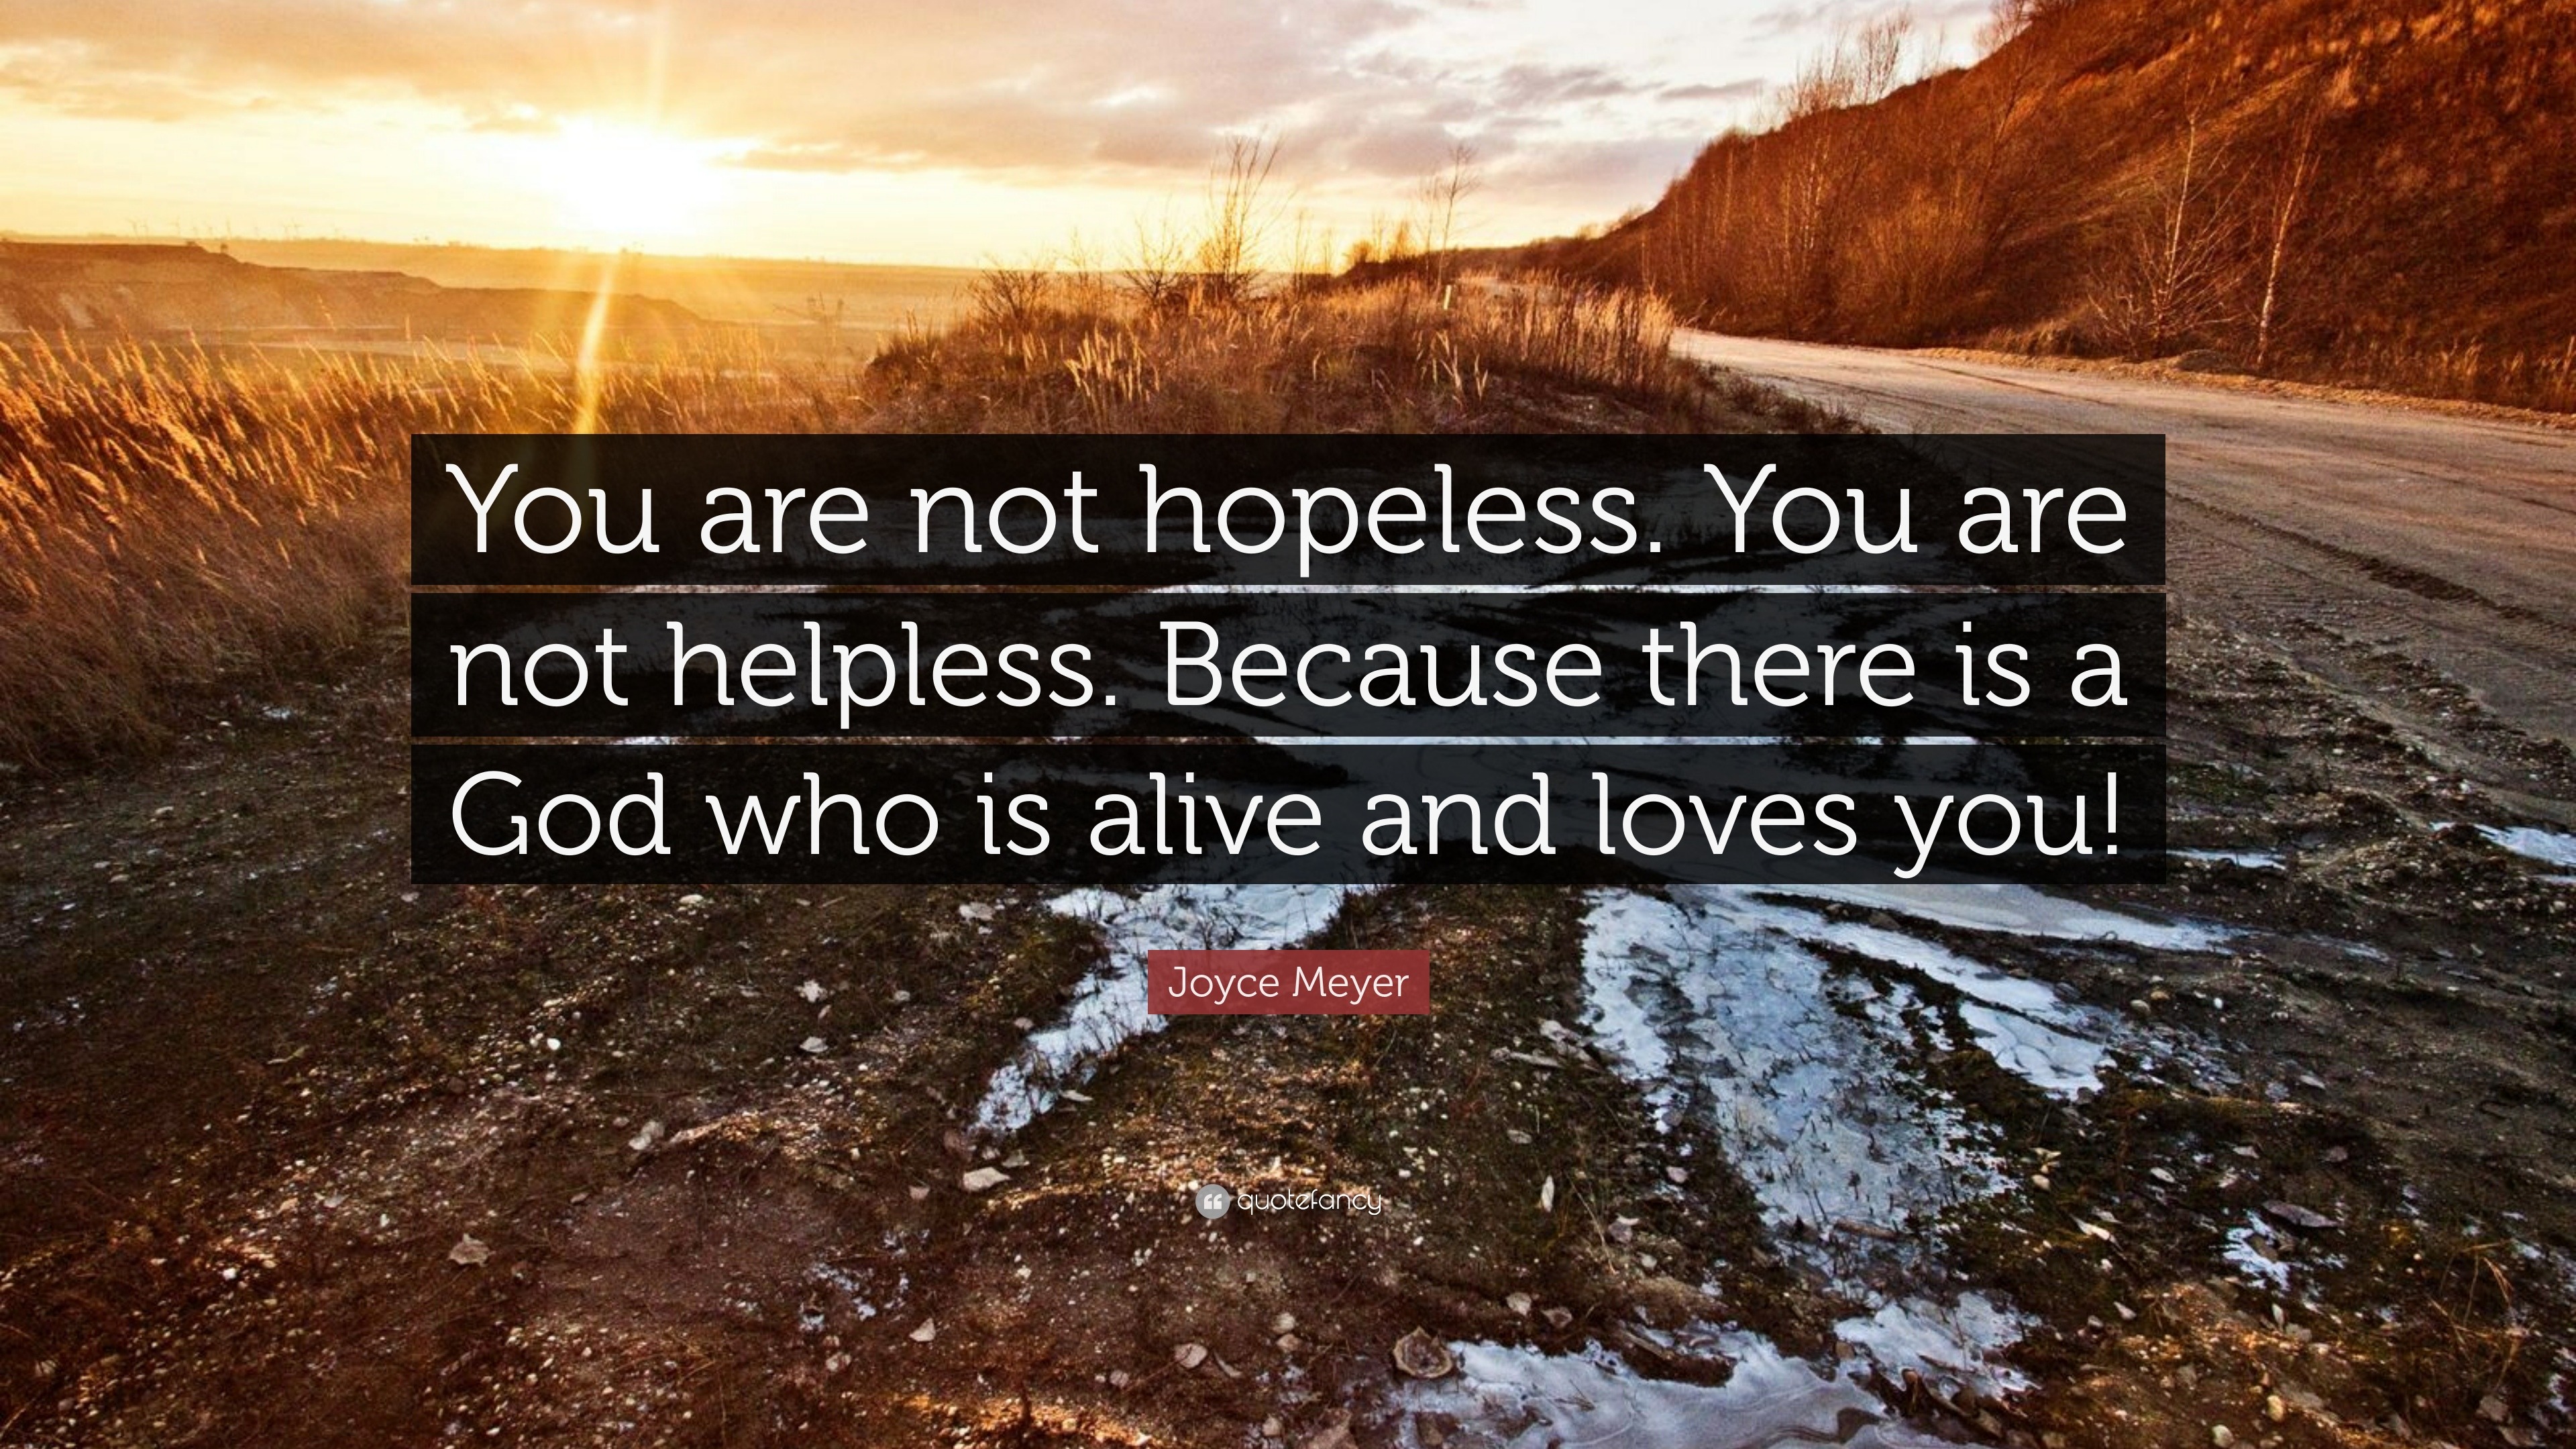 Joyce Meyer Quote: “You are not hopeless. You are not helpless. Because ...